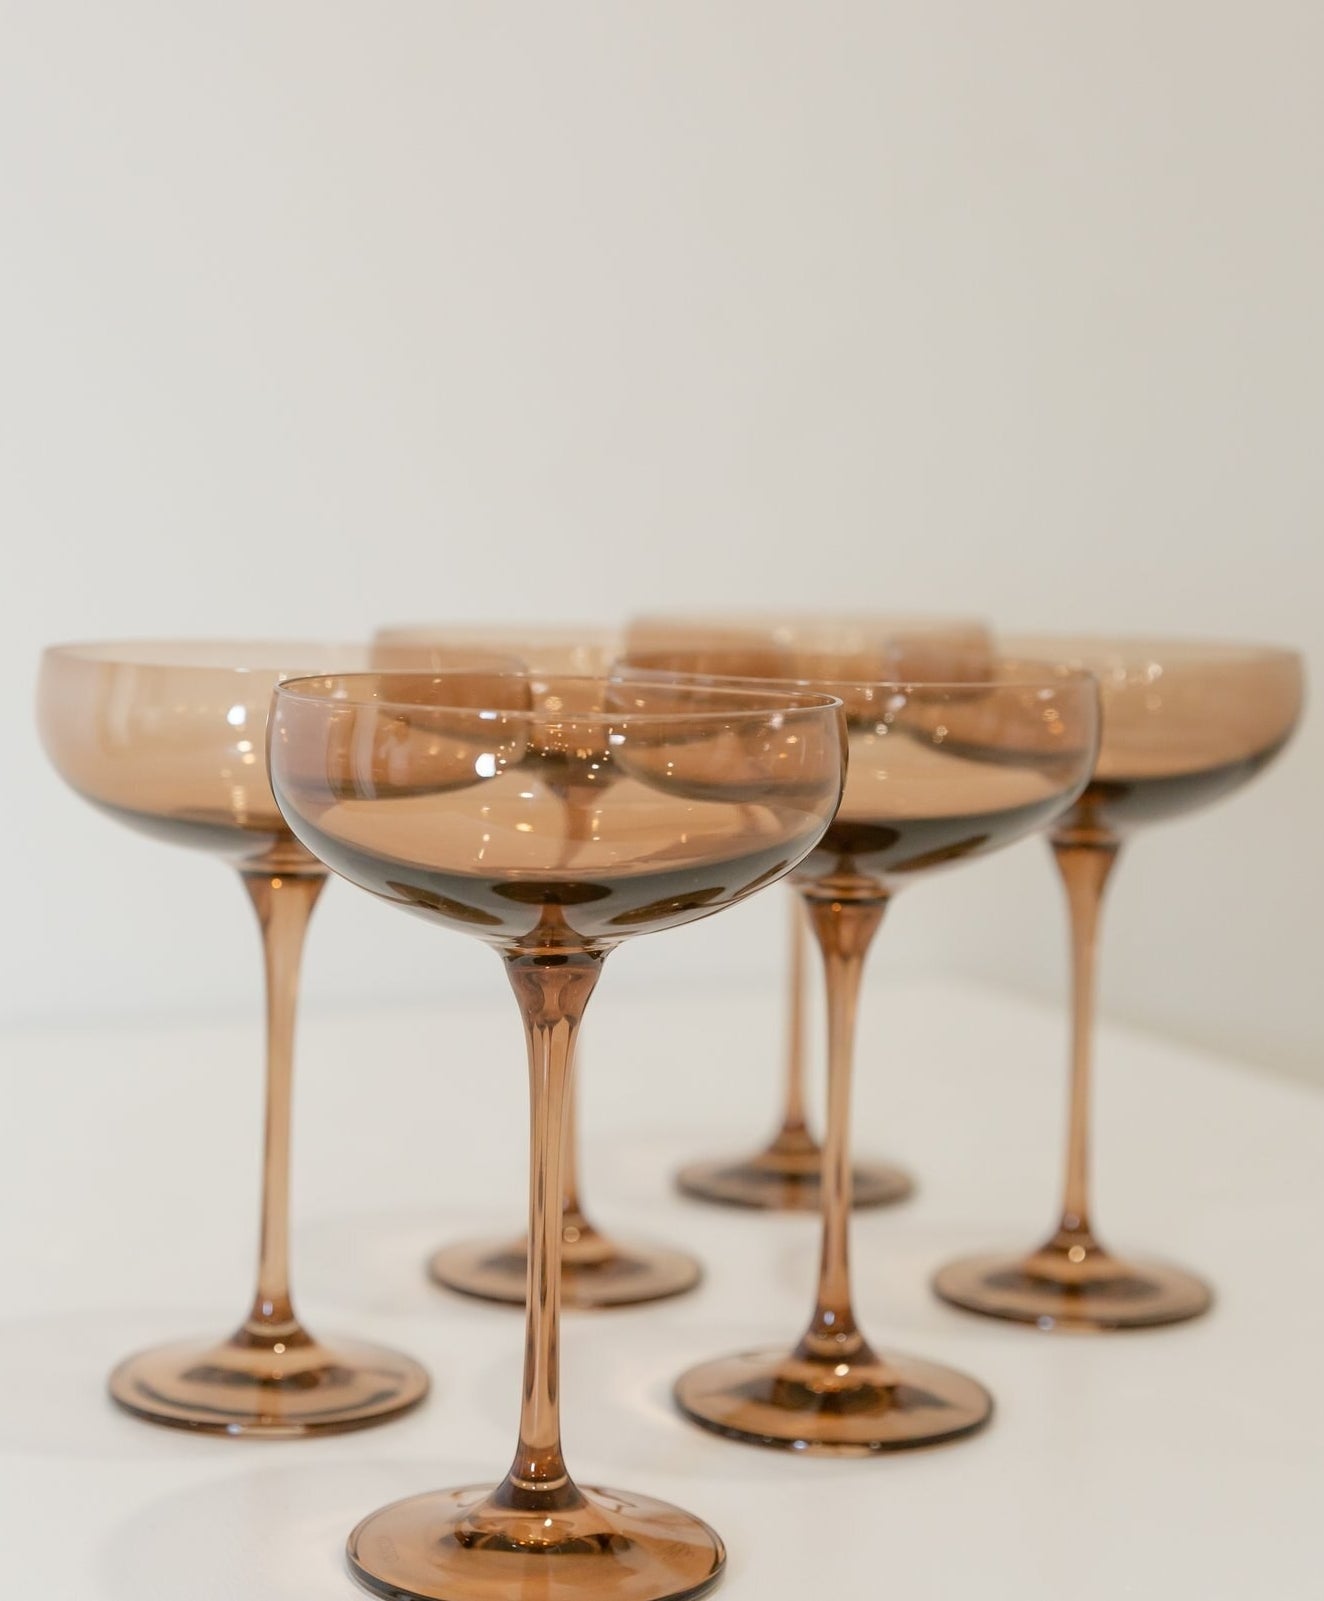 Multiple wine glasses in an amber color